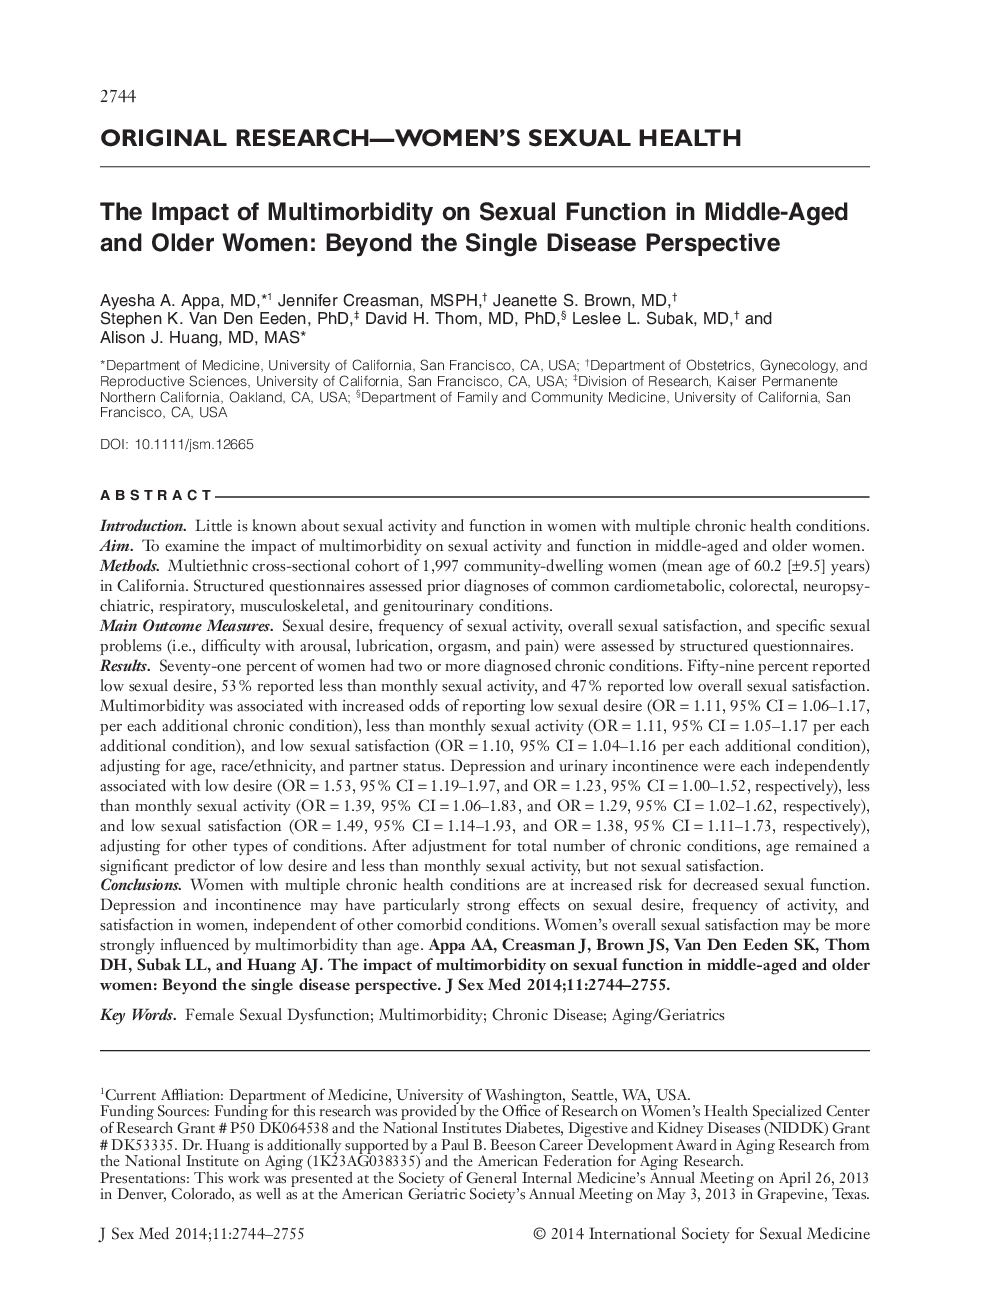 The Impact of Multimorbidity on Sexual Function in Middle-Aged and Older Women: Beyond the Single Disease Perspective 